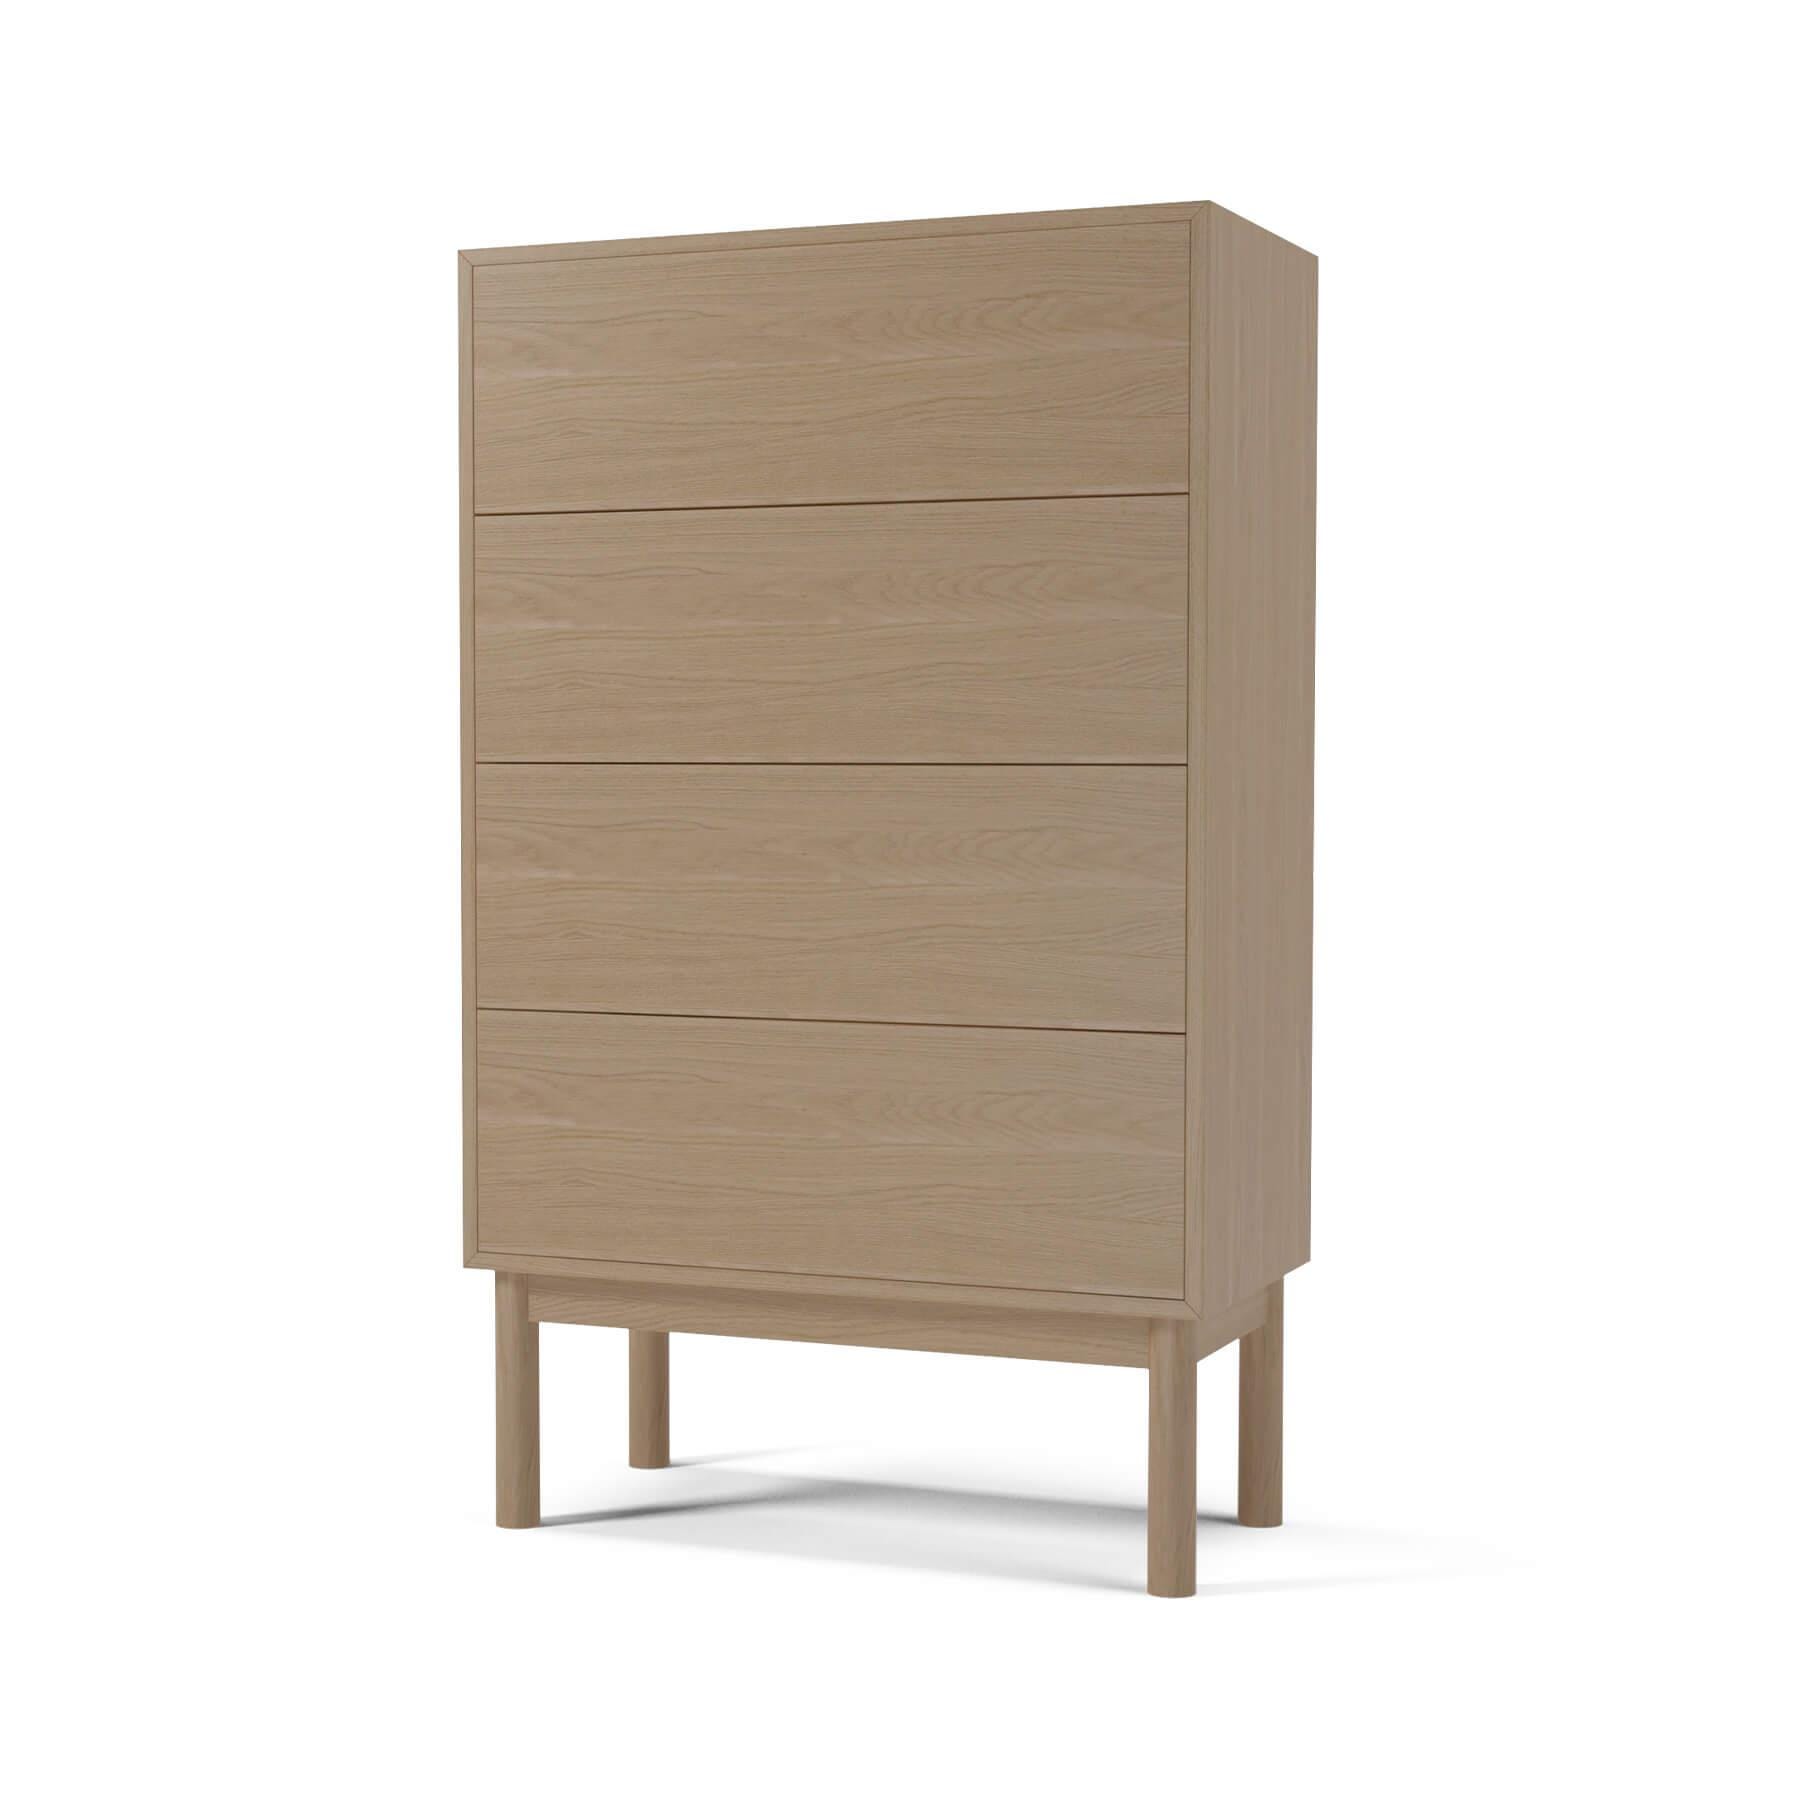 Bolia Case Sideboard White Pigmented Oil Light Wood Designer Furniture From Holloways Of Ludlow